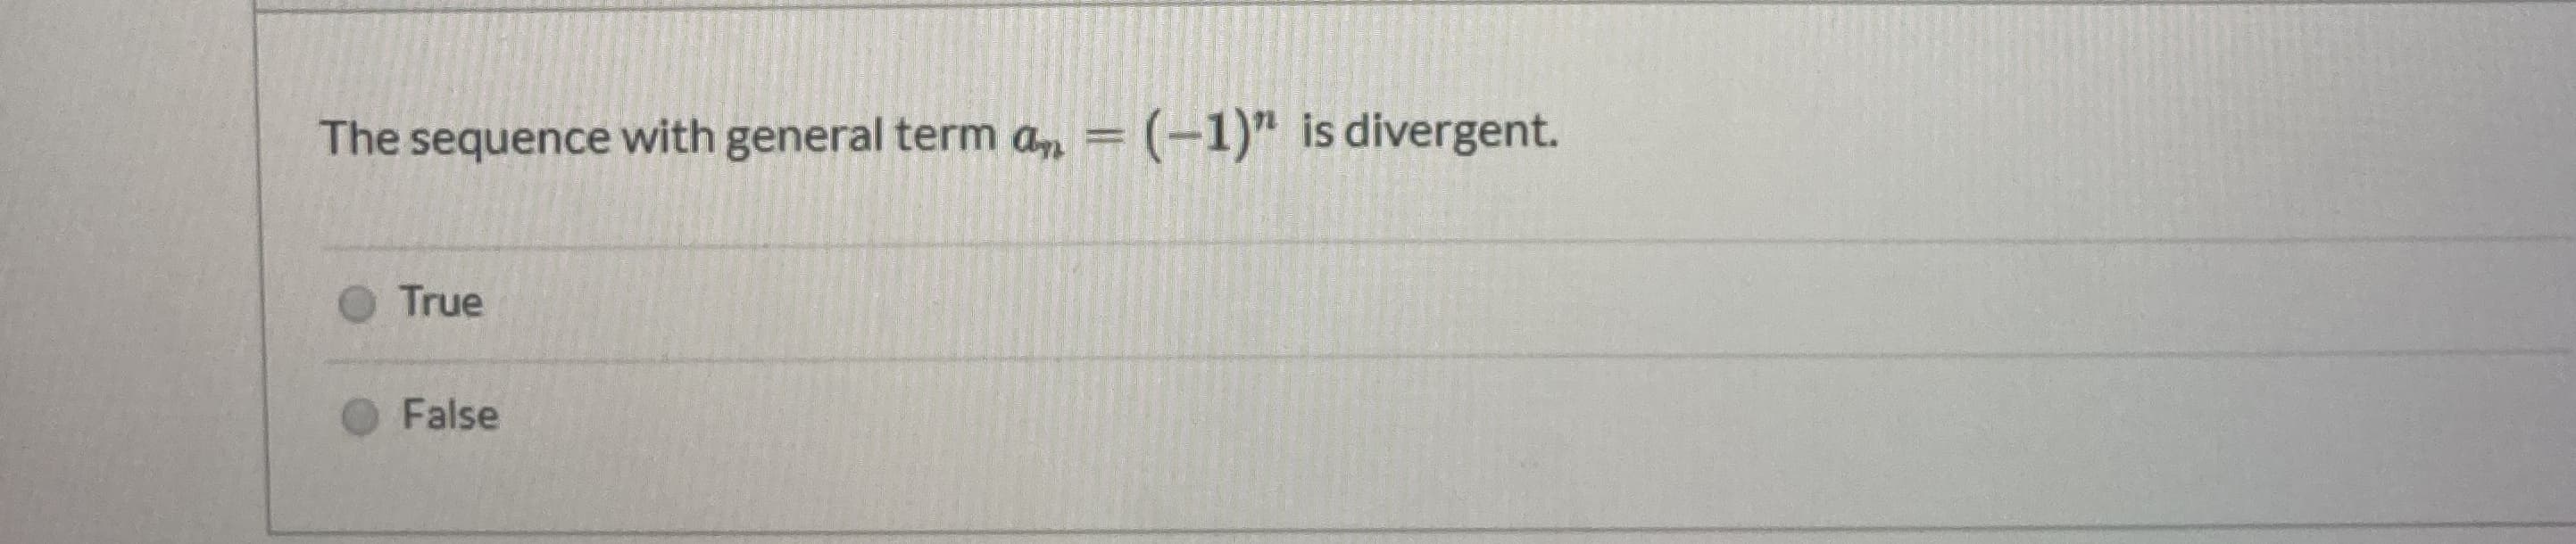 The sequence with general term an = (-1)" is divergent.
True
False
